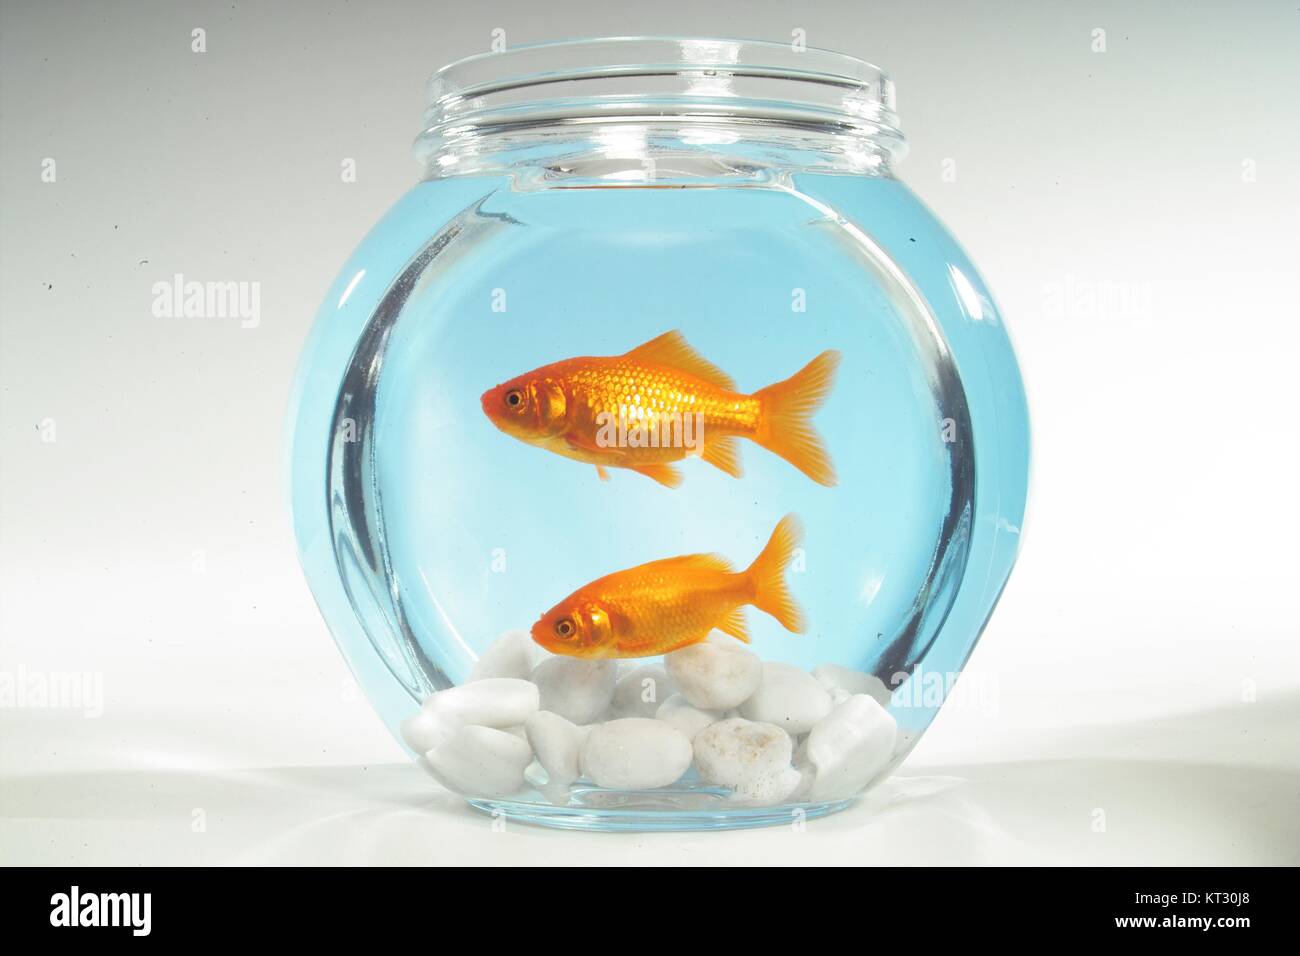 two goldfishes in a bowl Stock Photo